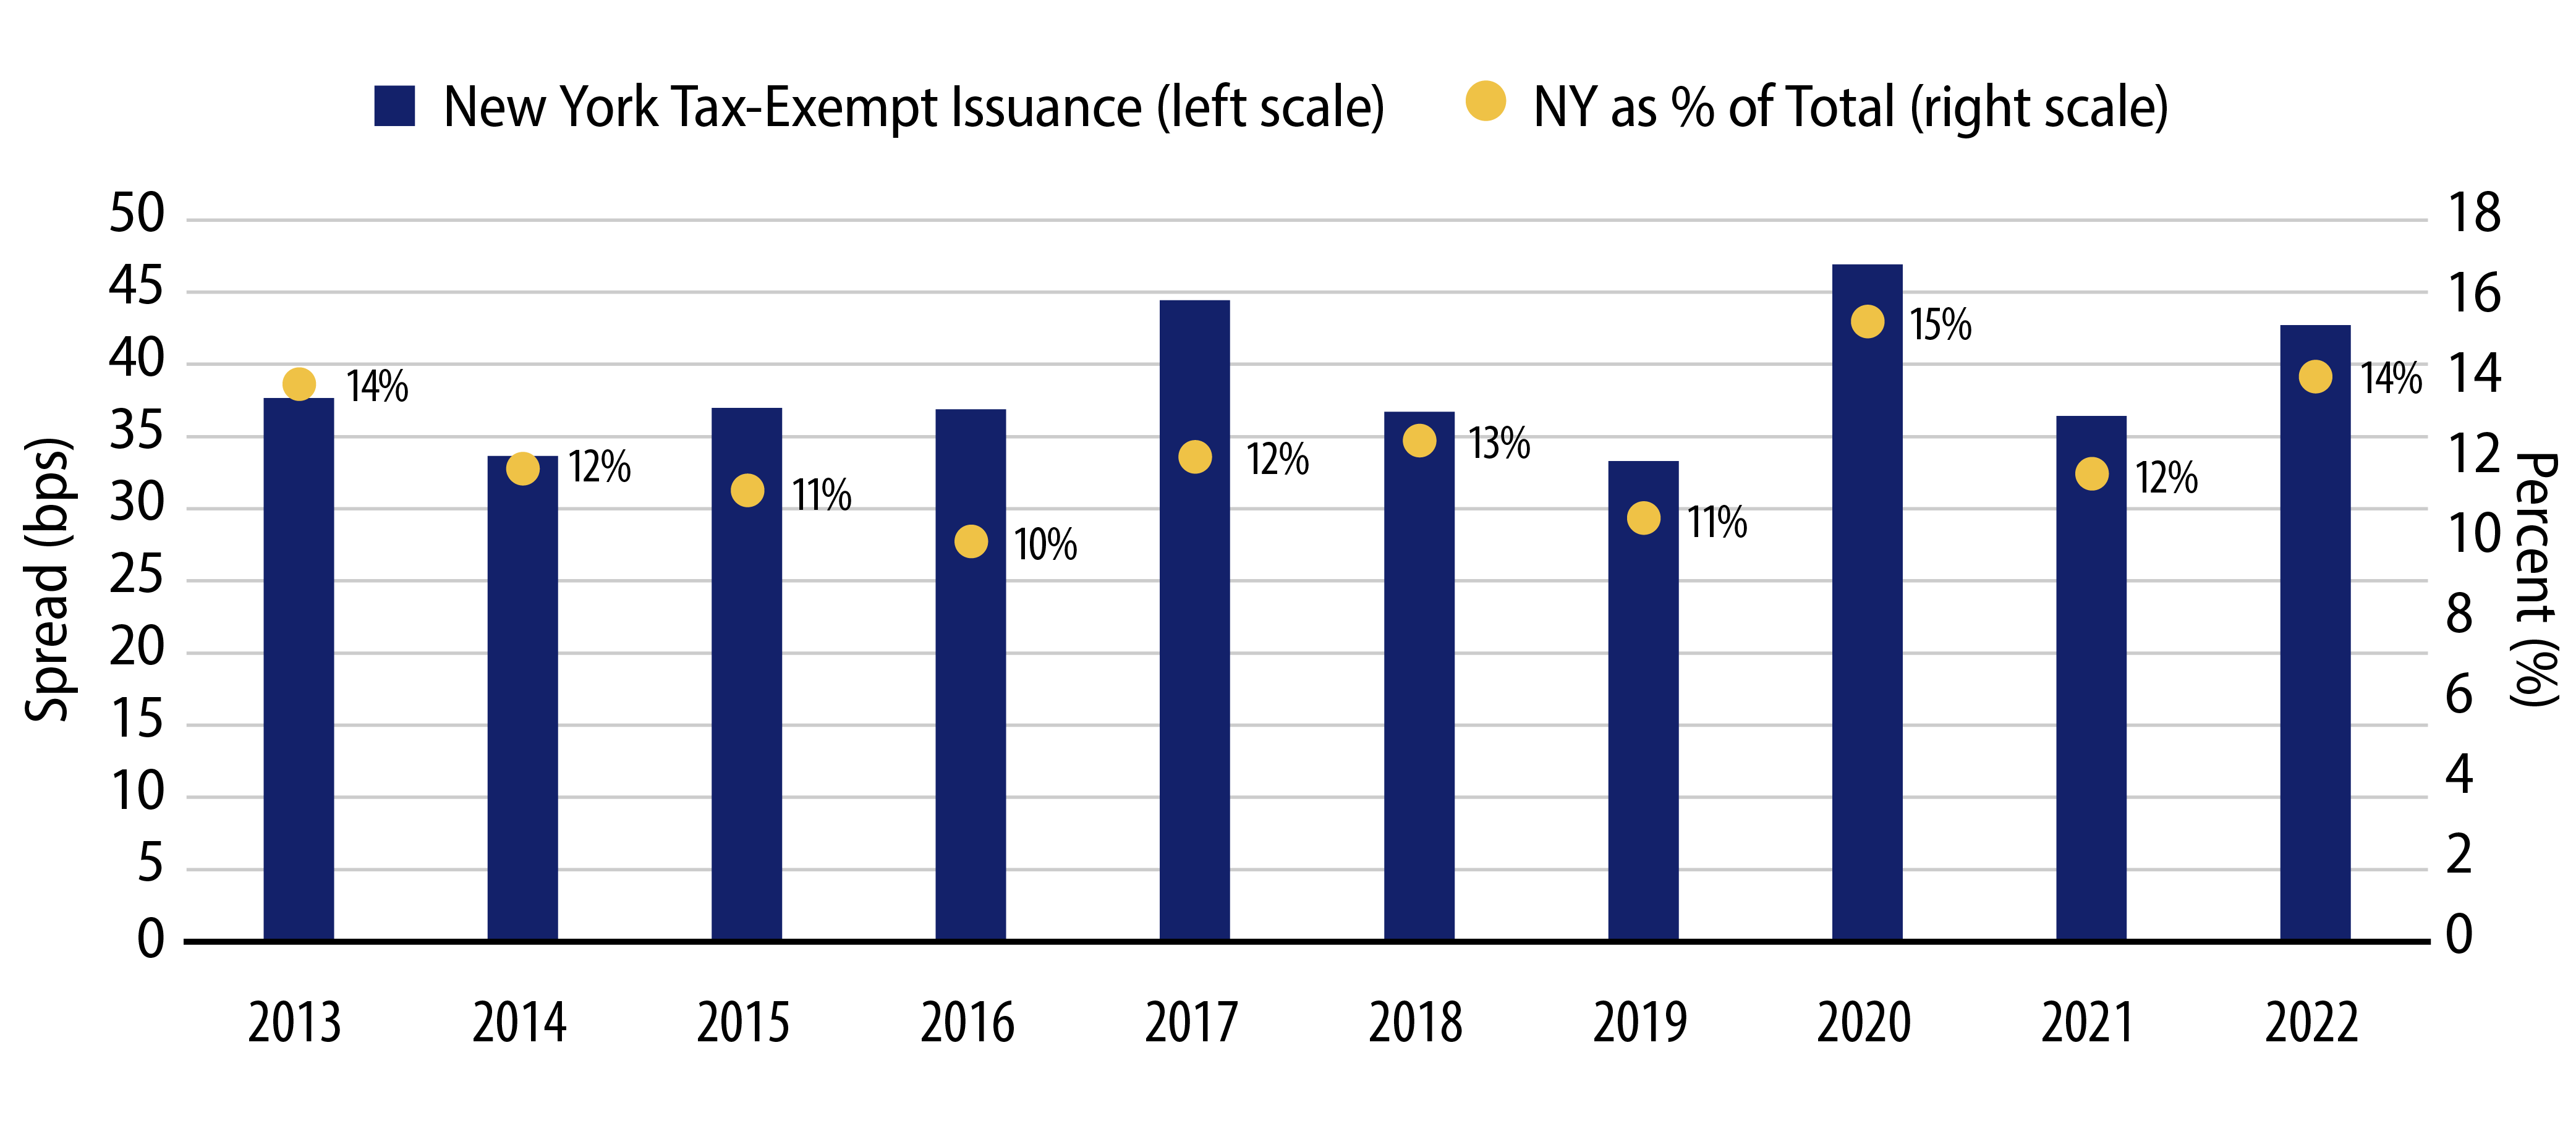 Explore New York Tax-Exempt Issuance as a % of Total Tax-Exempt Issuance